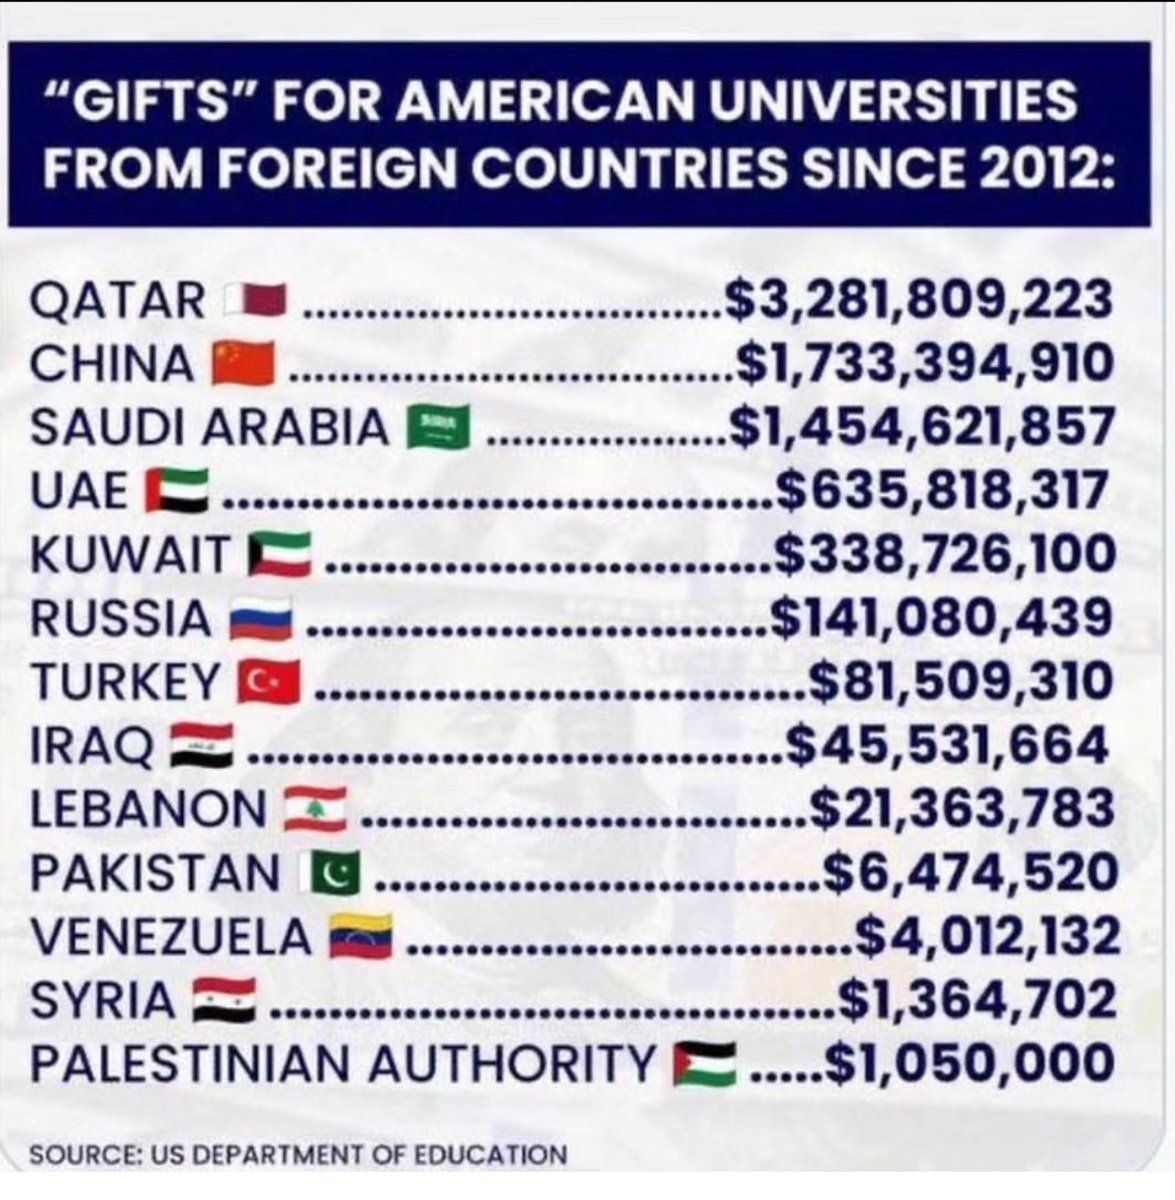 Gifts to American Universities from foreign countries are primarily from Muslim countries and it has a direct relationship to the current rise of #antisemitism.  @Columbia @nyuniversity @MIT @Harvard